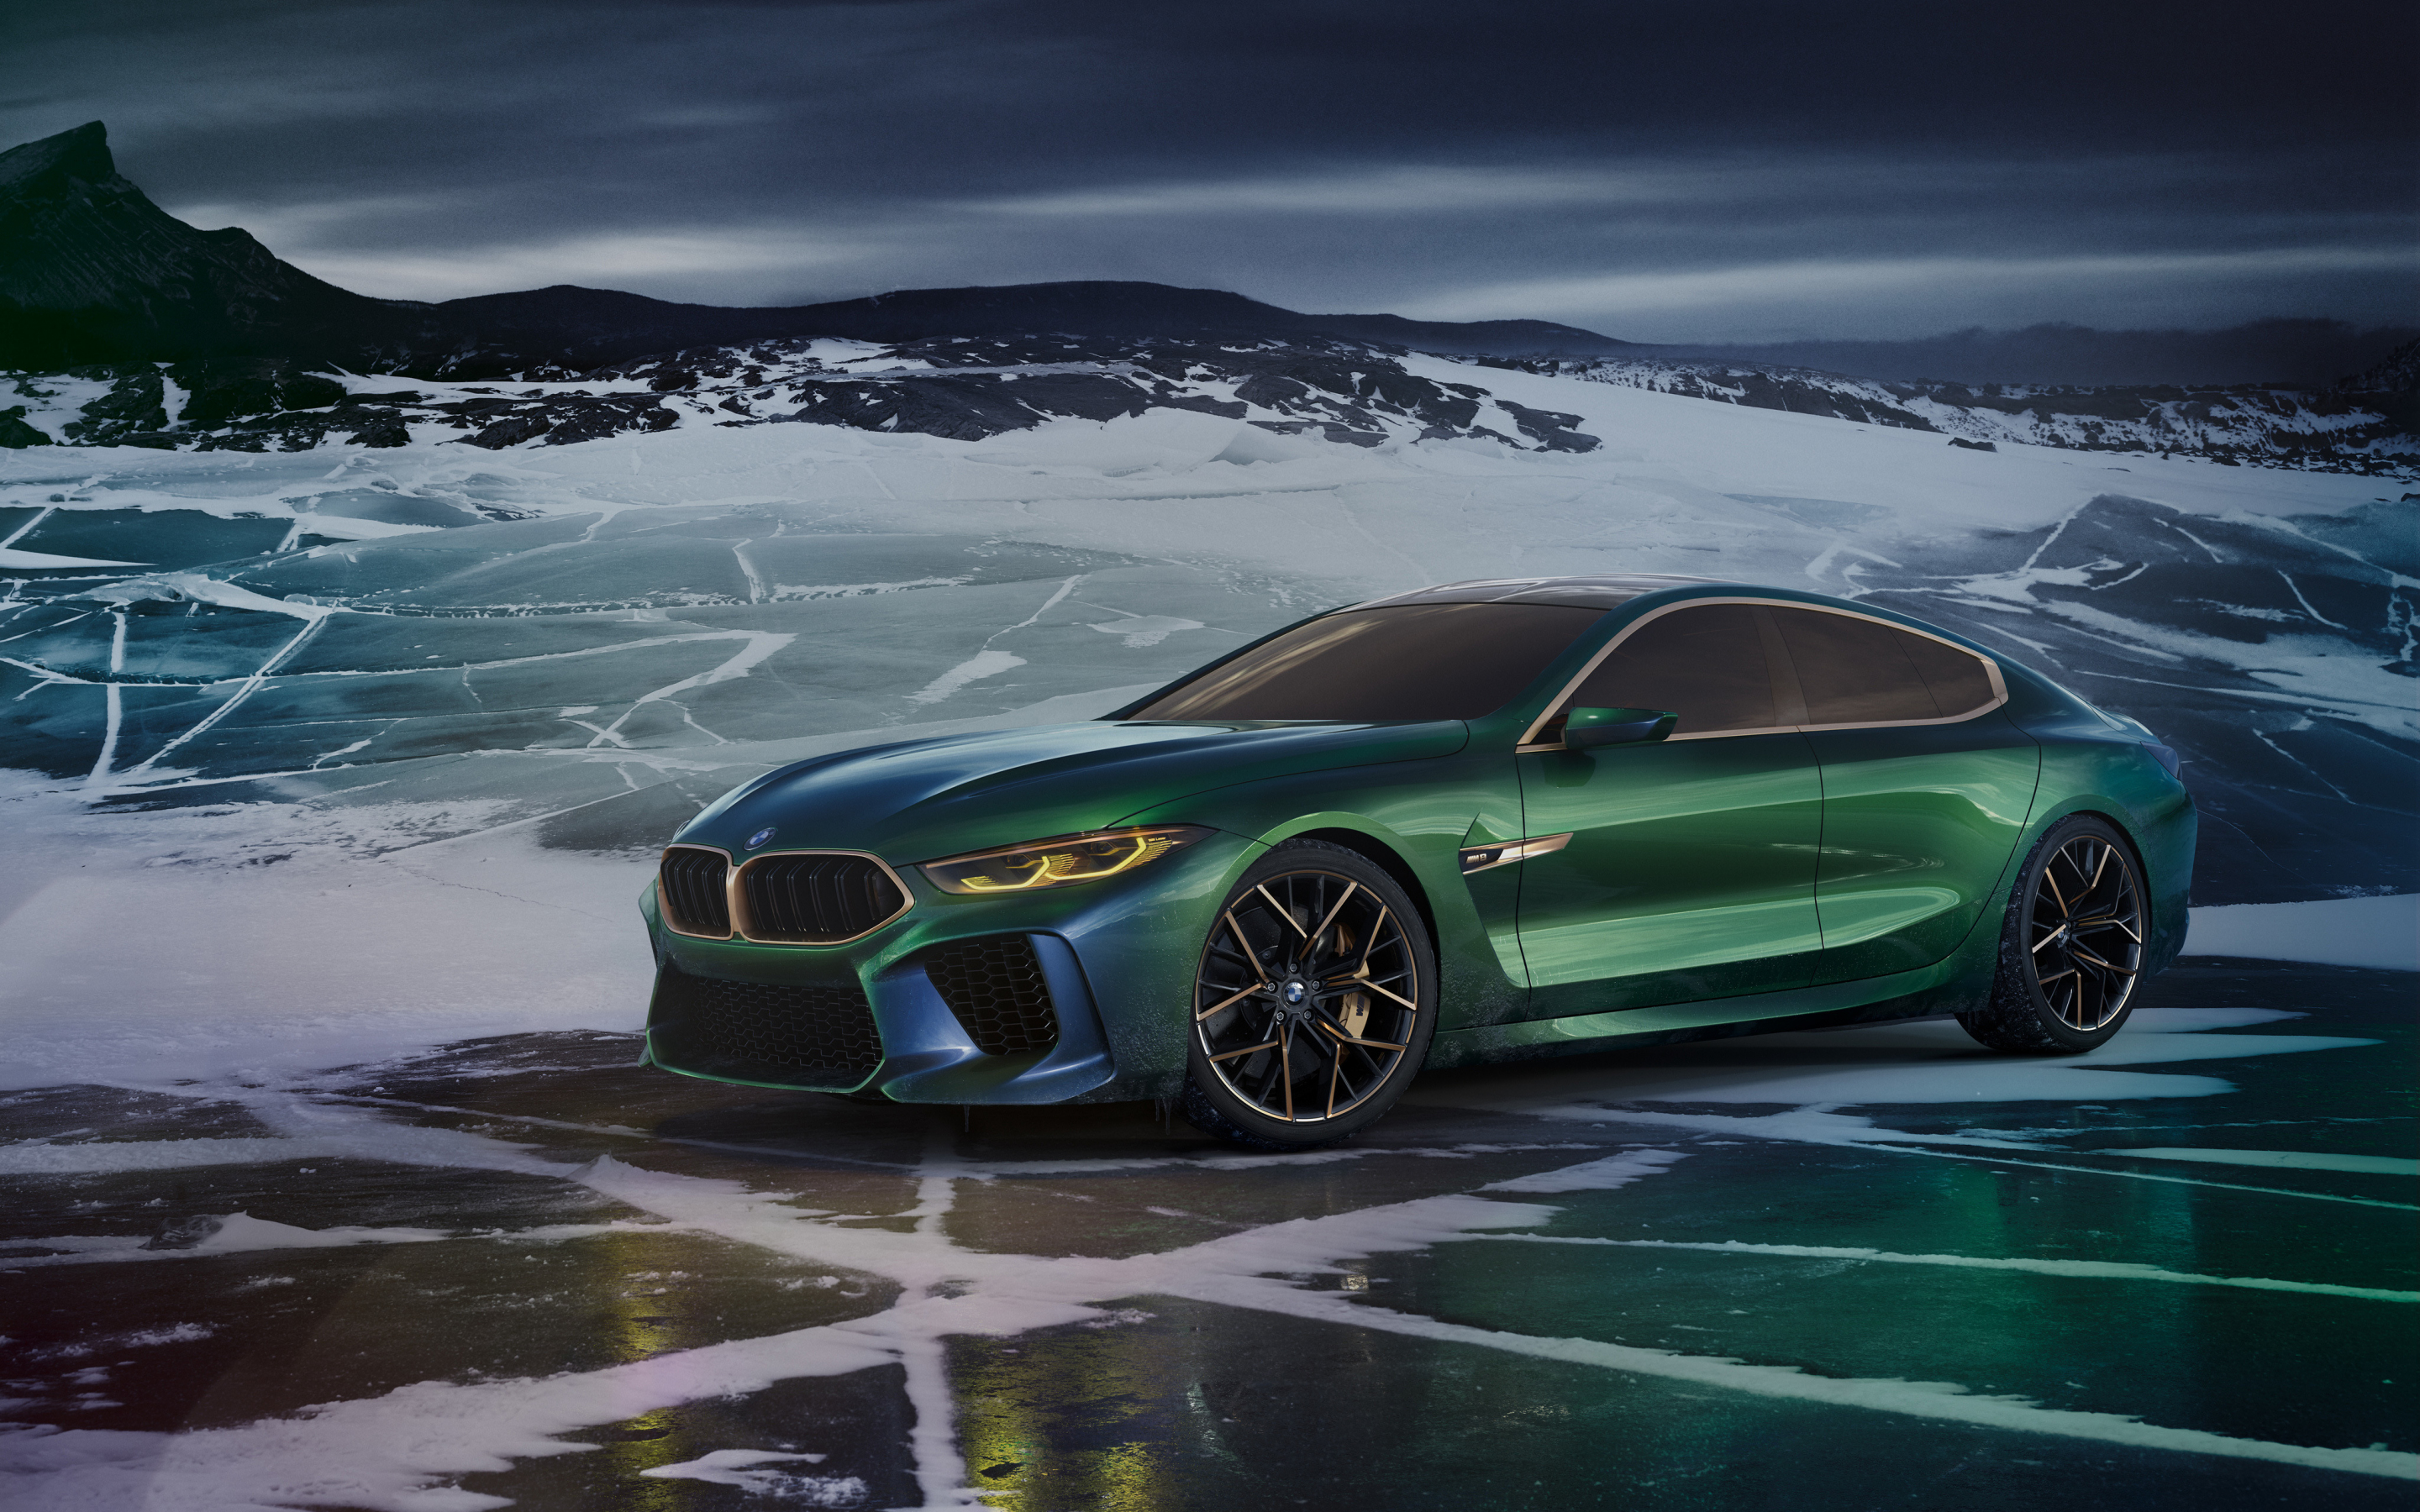 BMW concept M8 Gran coupe, outdoor, green luxury car, 2018, 2880x1800 wallpaper